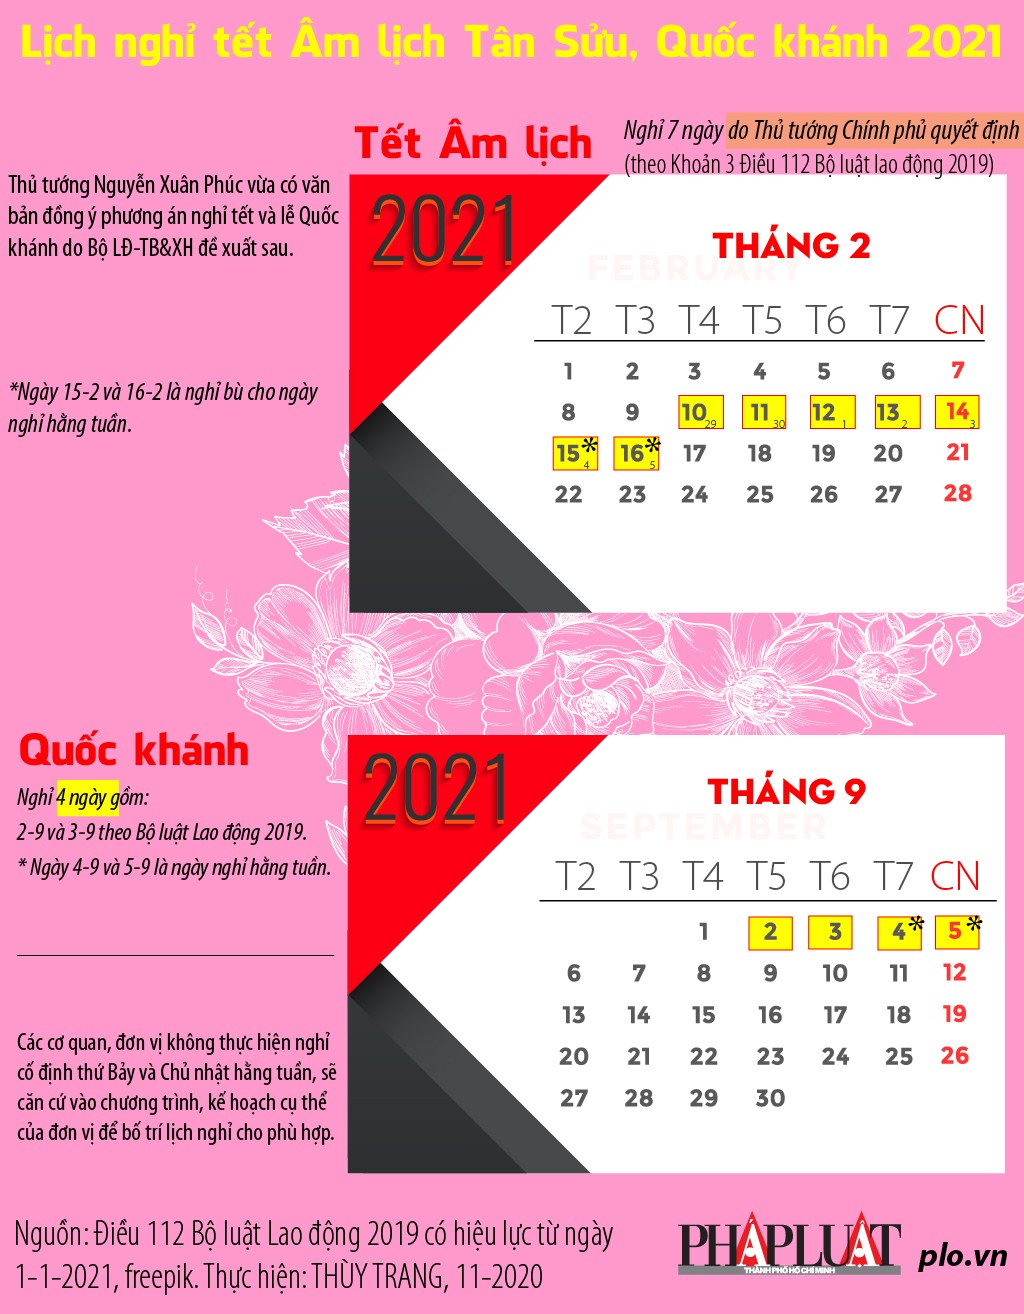 Lịch nghỉ tết Âm lịch và Quốc khánh 2021: Plan your holidays ahead with this handy calendar! This image displays the official schedule of public holidays and observances in Vietnam for the lunar new year and national day. From February 10th to 16th for Tết to September 2nd for Quốc khánh, mark your calendars and make the most of your time off. Check out our travel guides and recommendations for each occasion and kick off your 2021 with a bang!